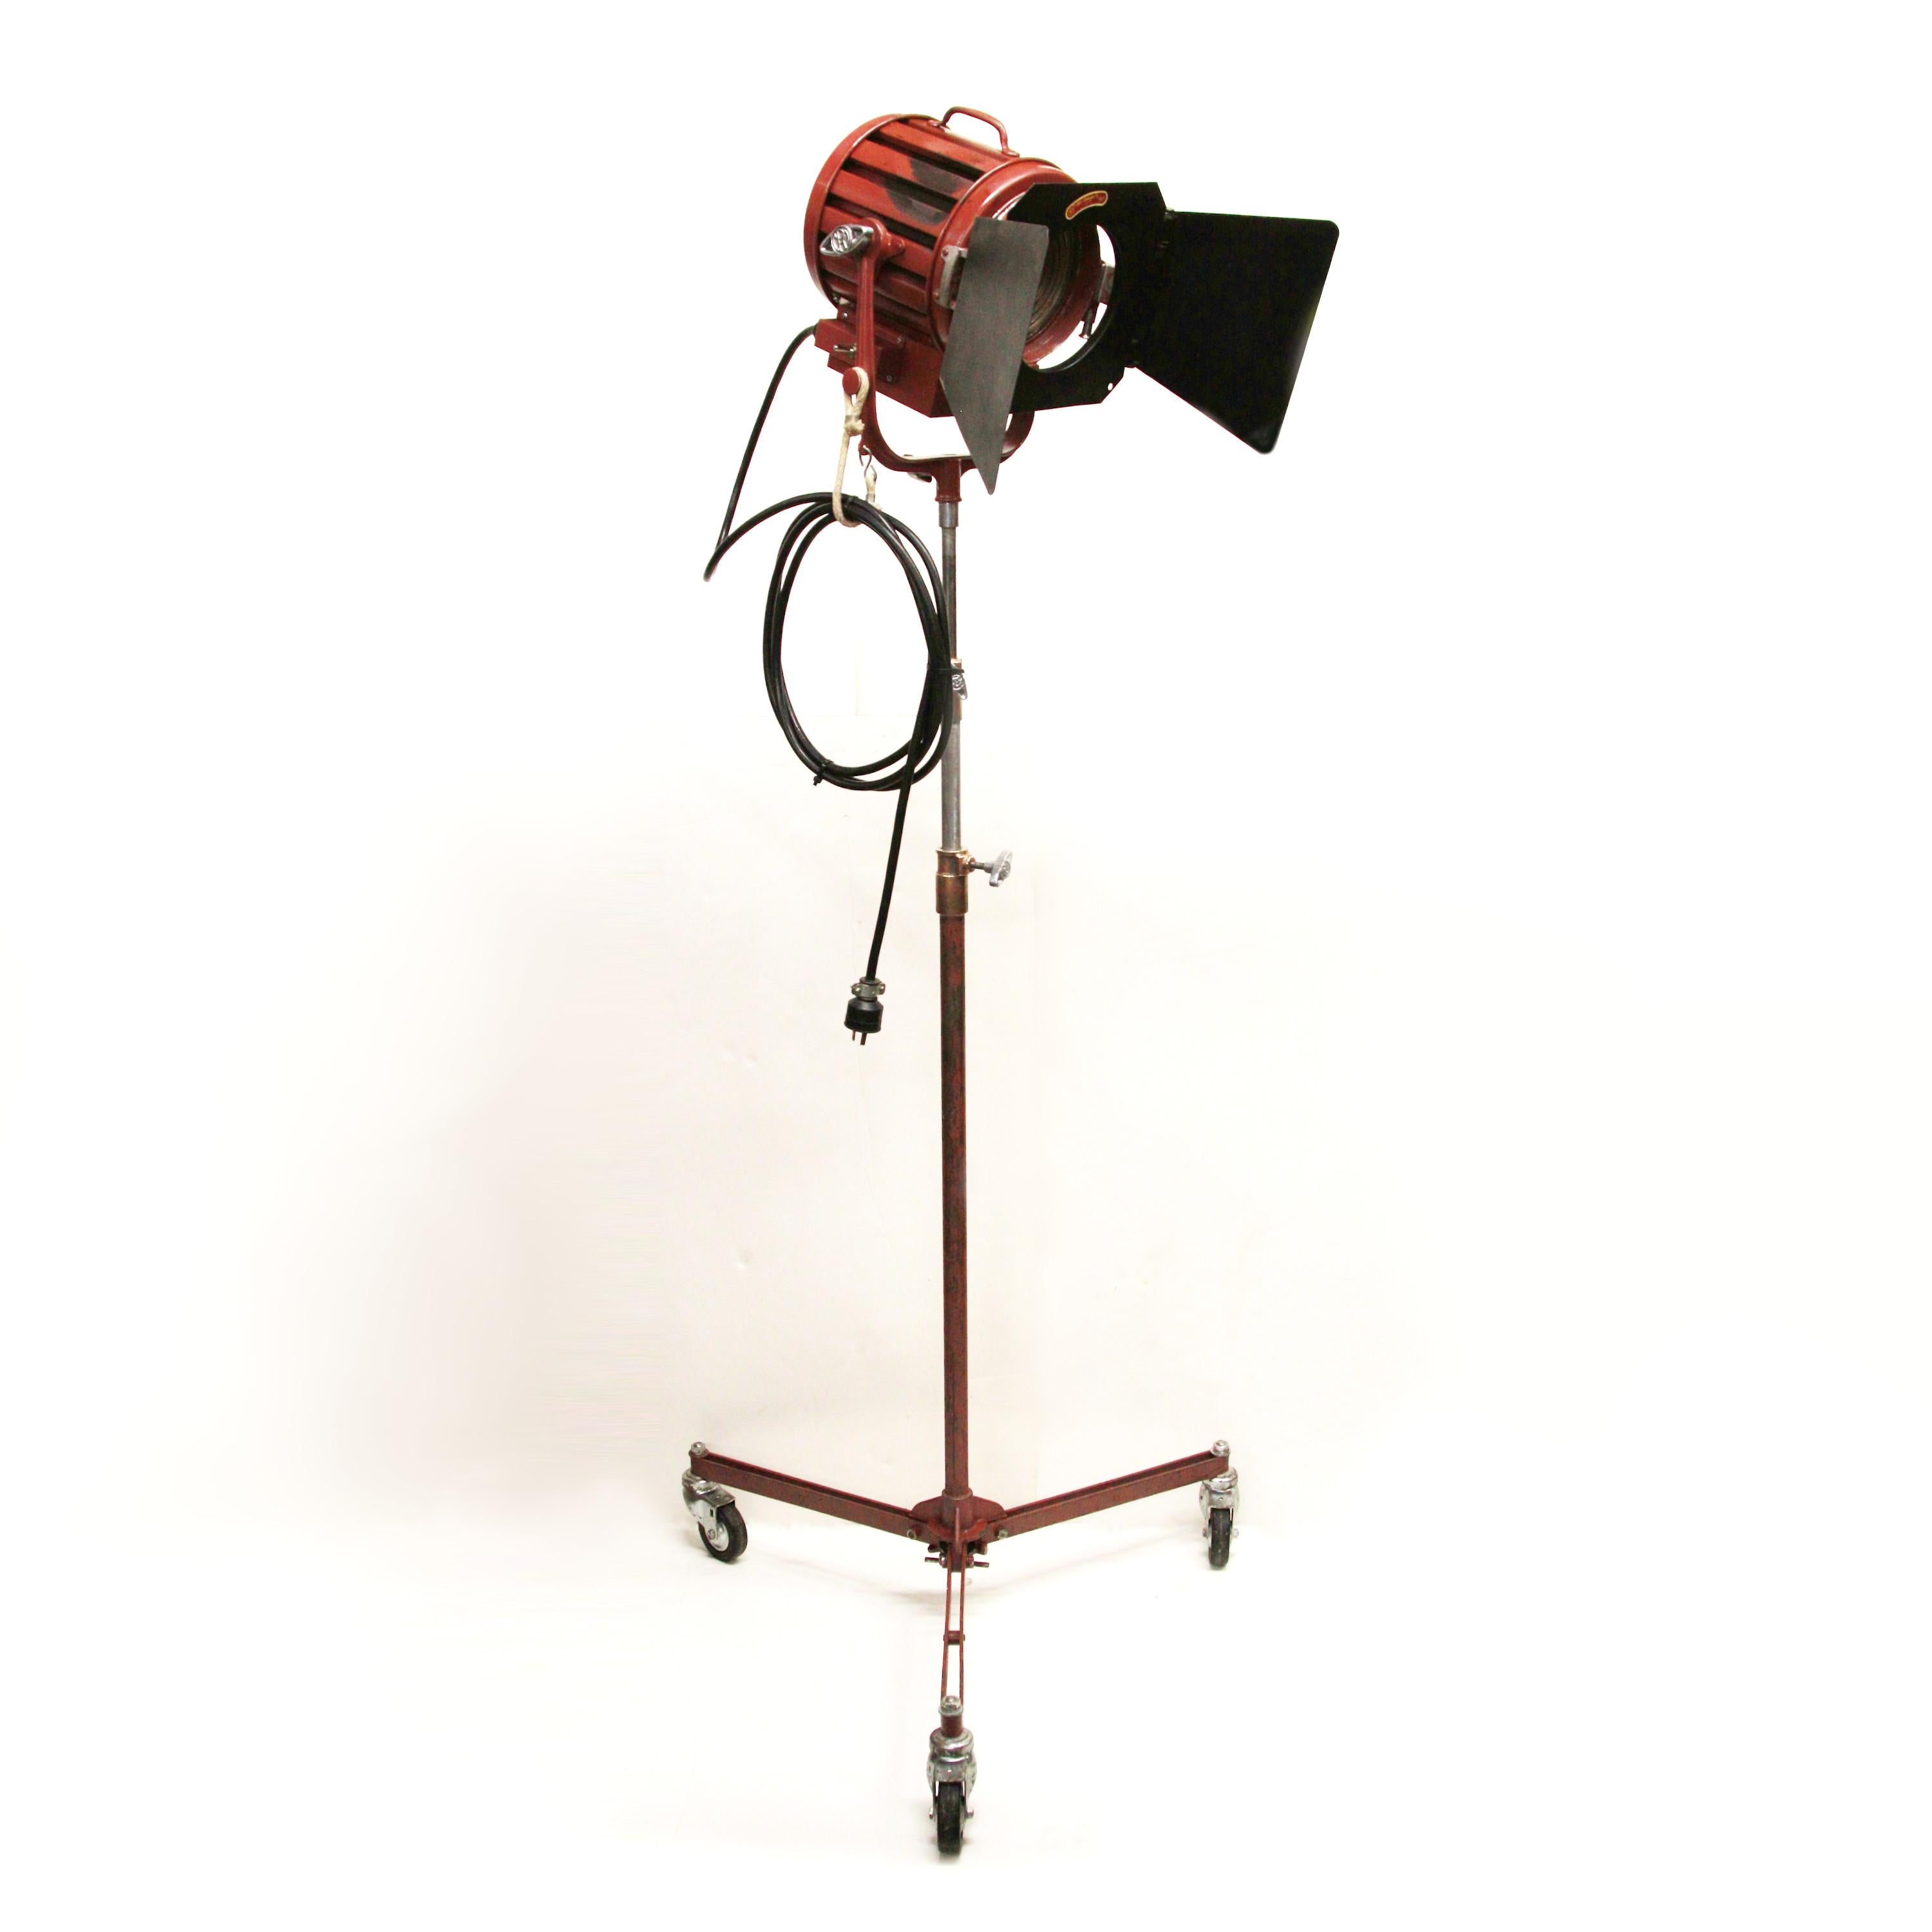 Vintage type 407 baby solarspot stage light by Mole-Richardson of Hollywood, CA.

This fantastic light is in 90% original condition with some light polishing to accentuate the bronze handles and knobs. Original maroon/burgundy paint is 99% intact